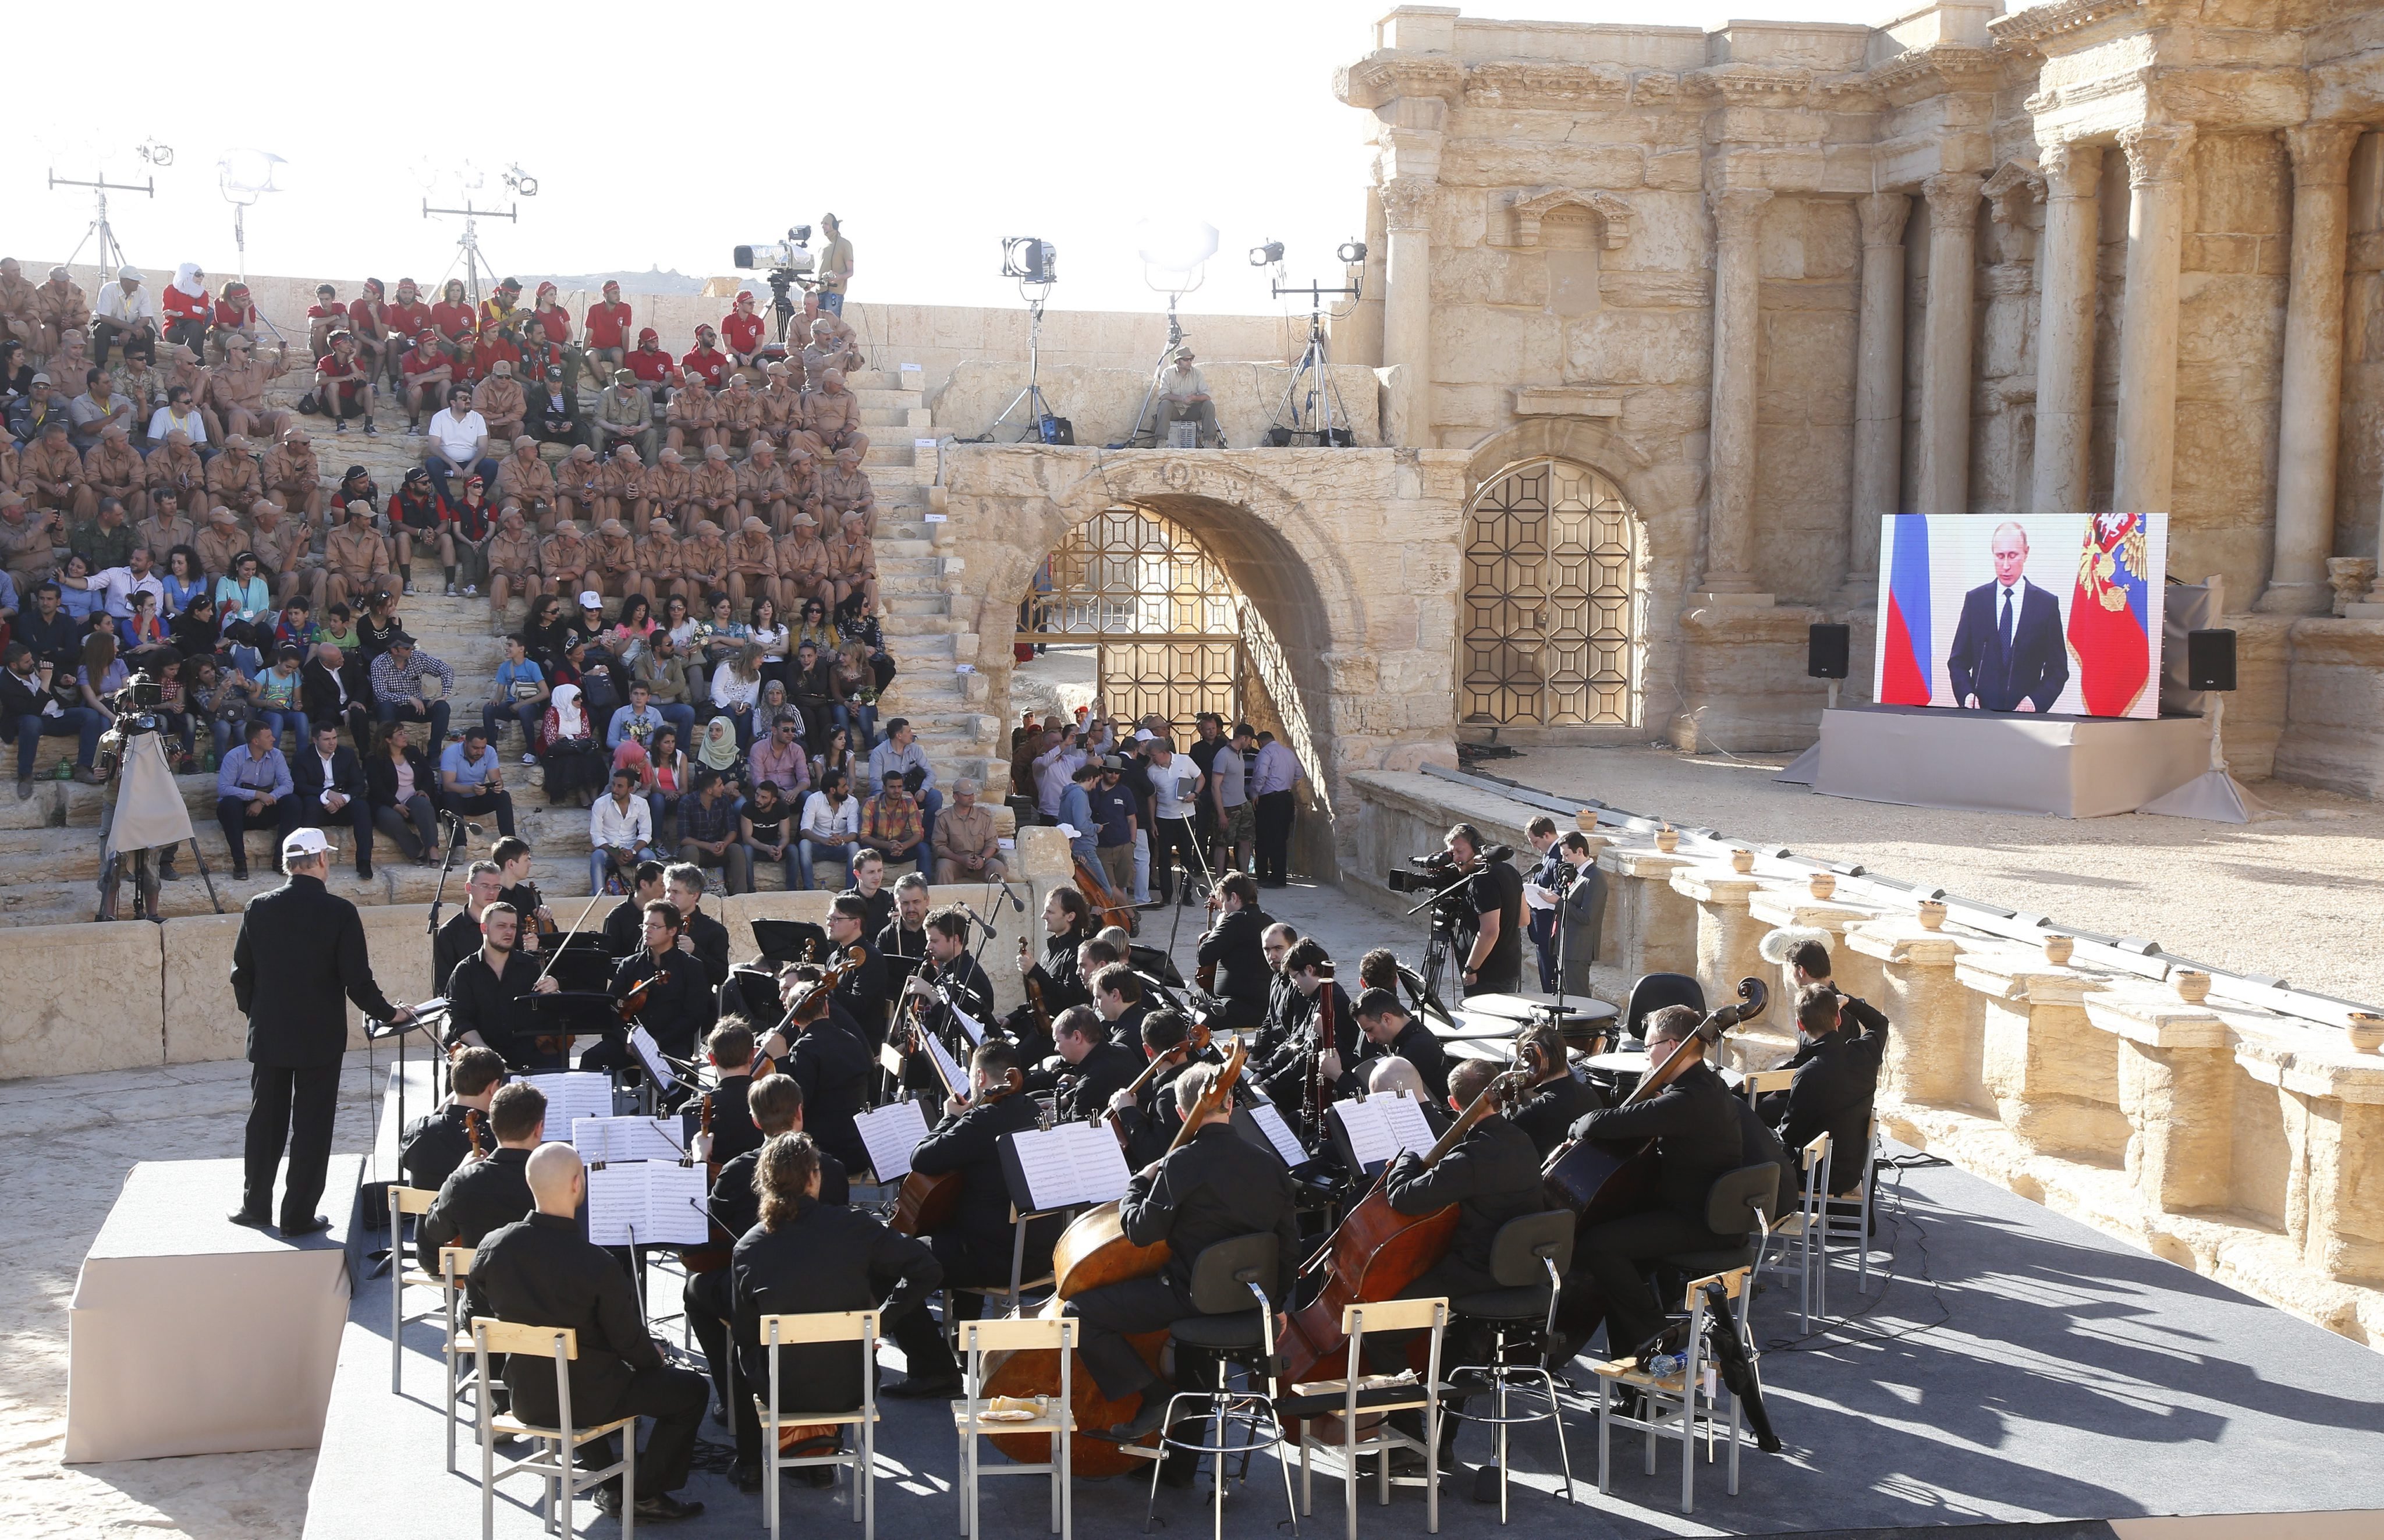 Russian President Vladimir Putin, via a live video feed (screen at right), delivers a speech during a concert by the Mariinsky Theater Orchestra in Palmyra amphitheater in Syria, on May 5, 2016. (Sergei Chirikov—EPA)